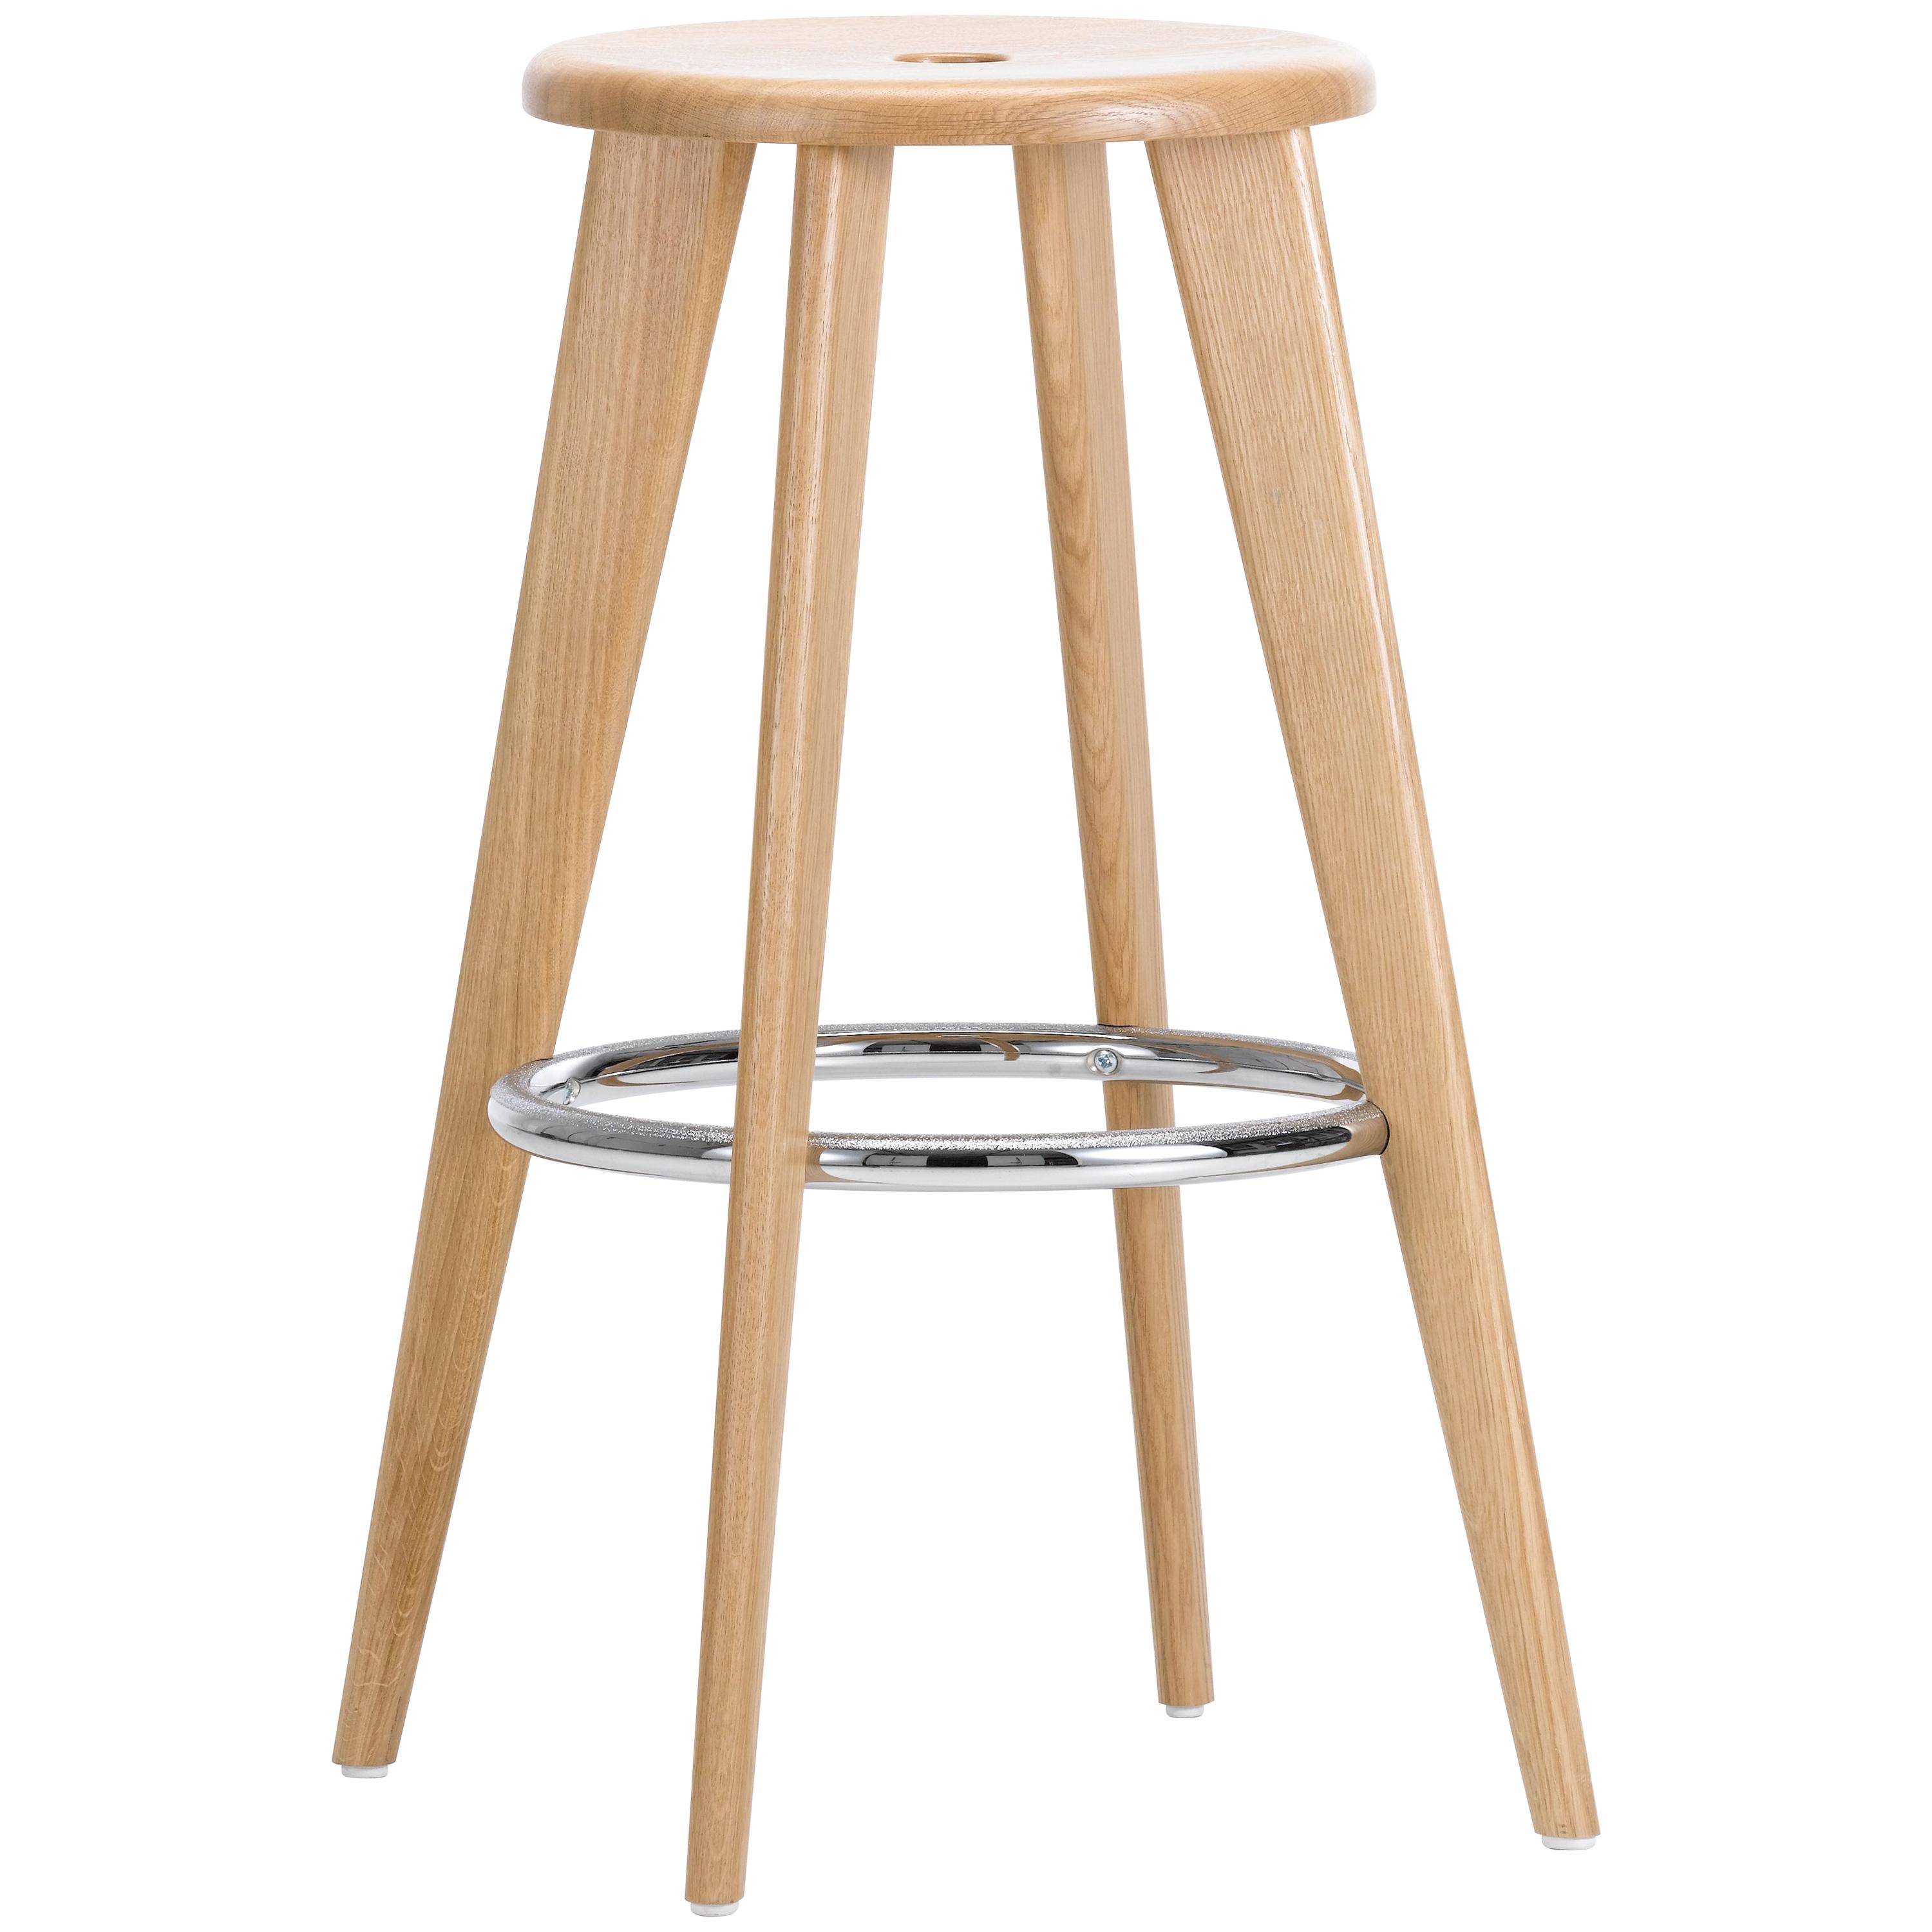 Vitra Tabouret Haut Bar Stool in Natural Oak by Jean Prouvé For Sale